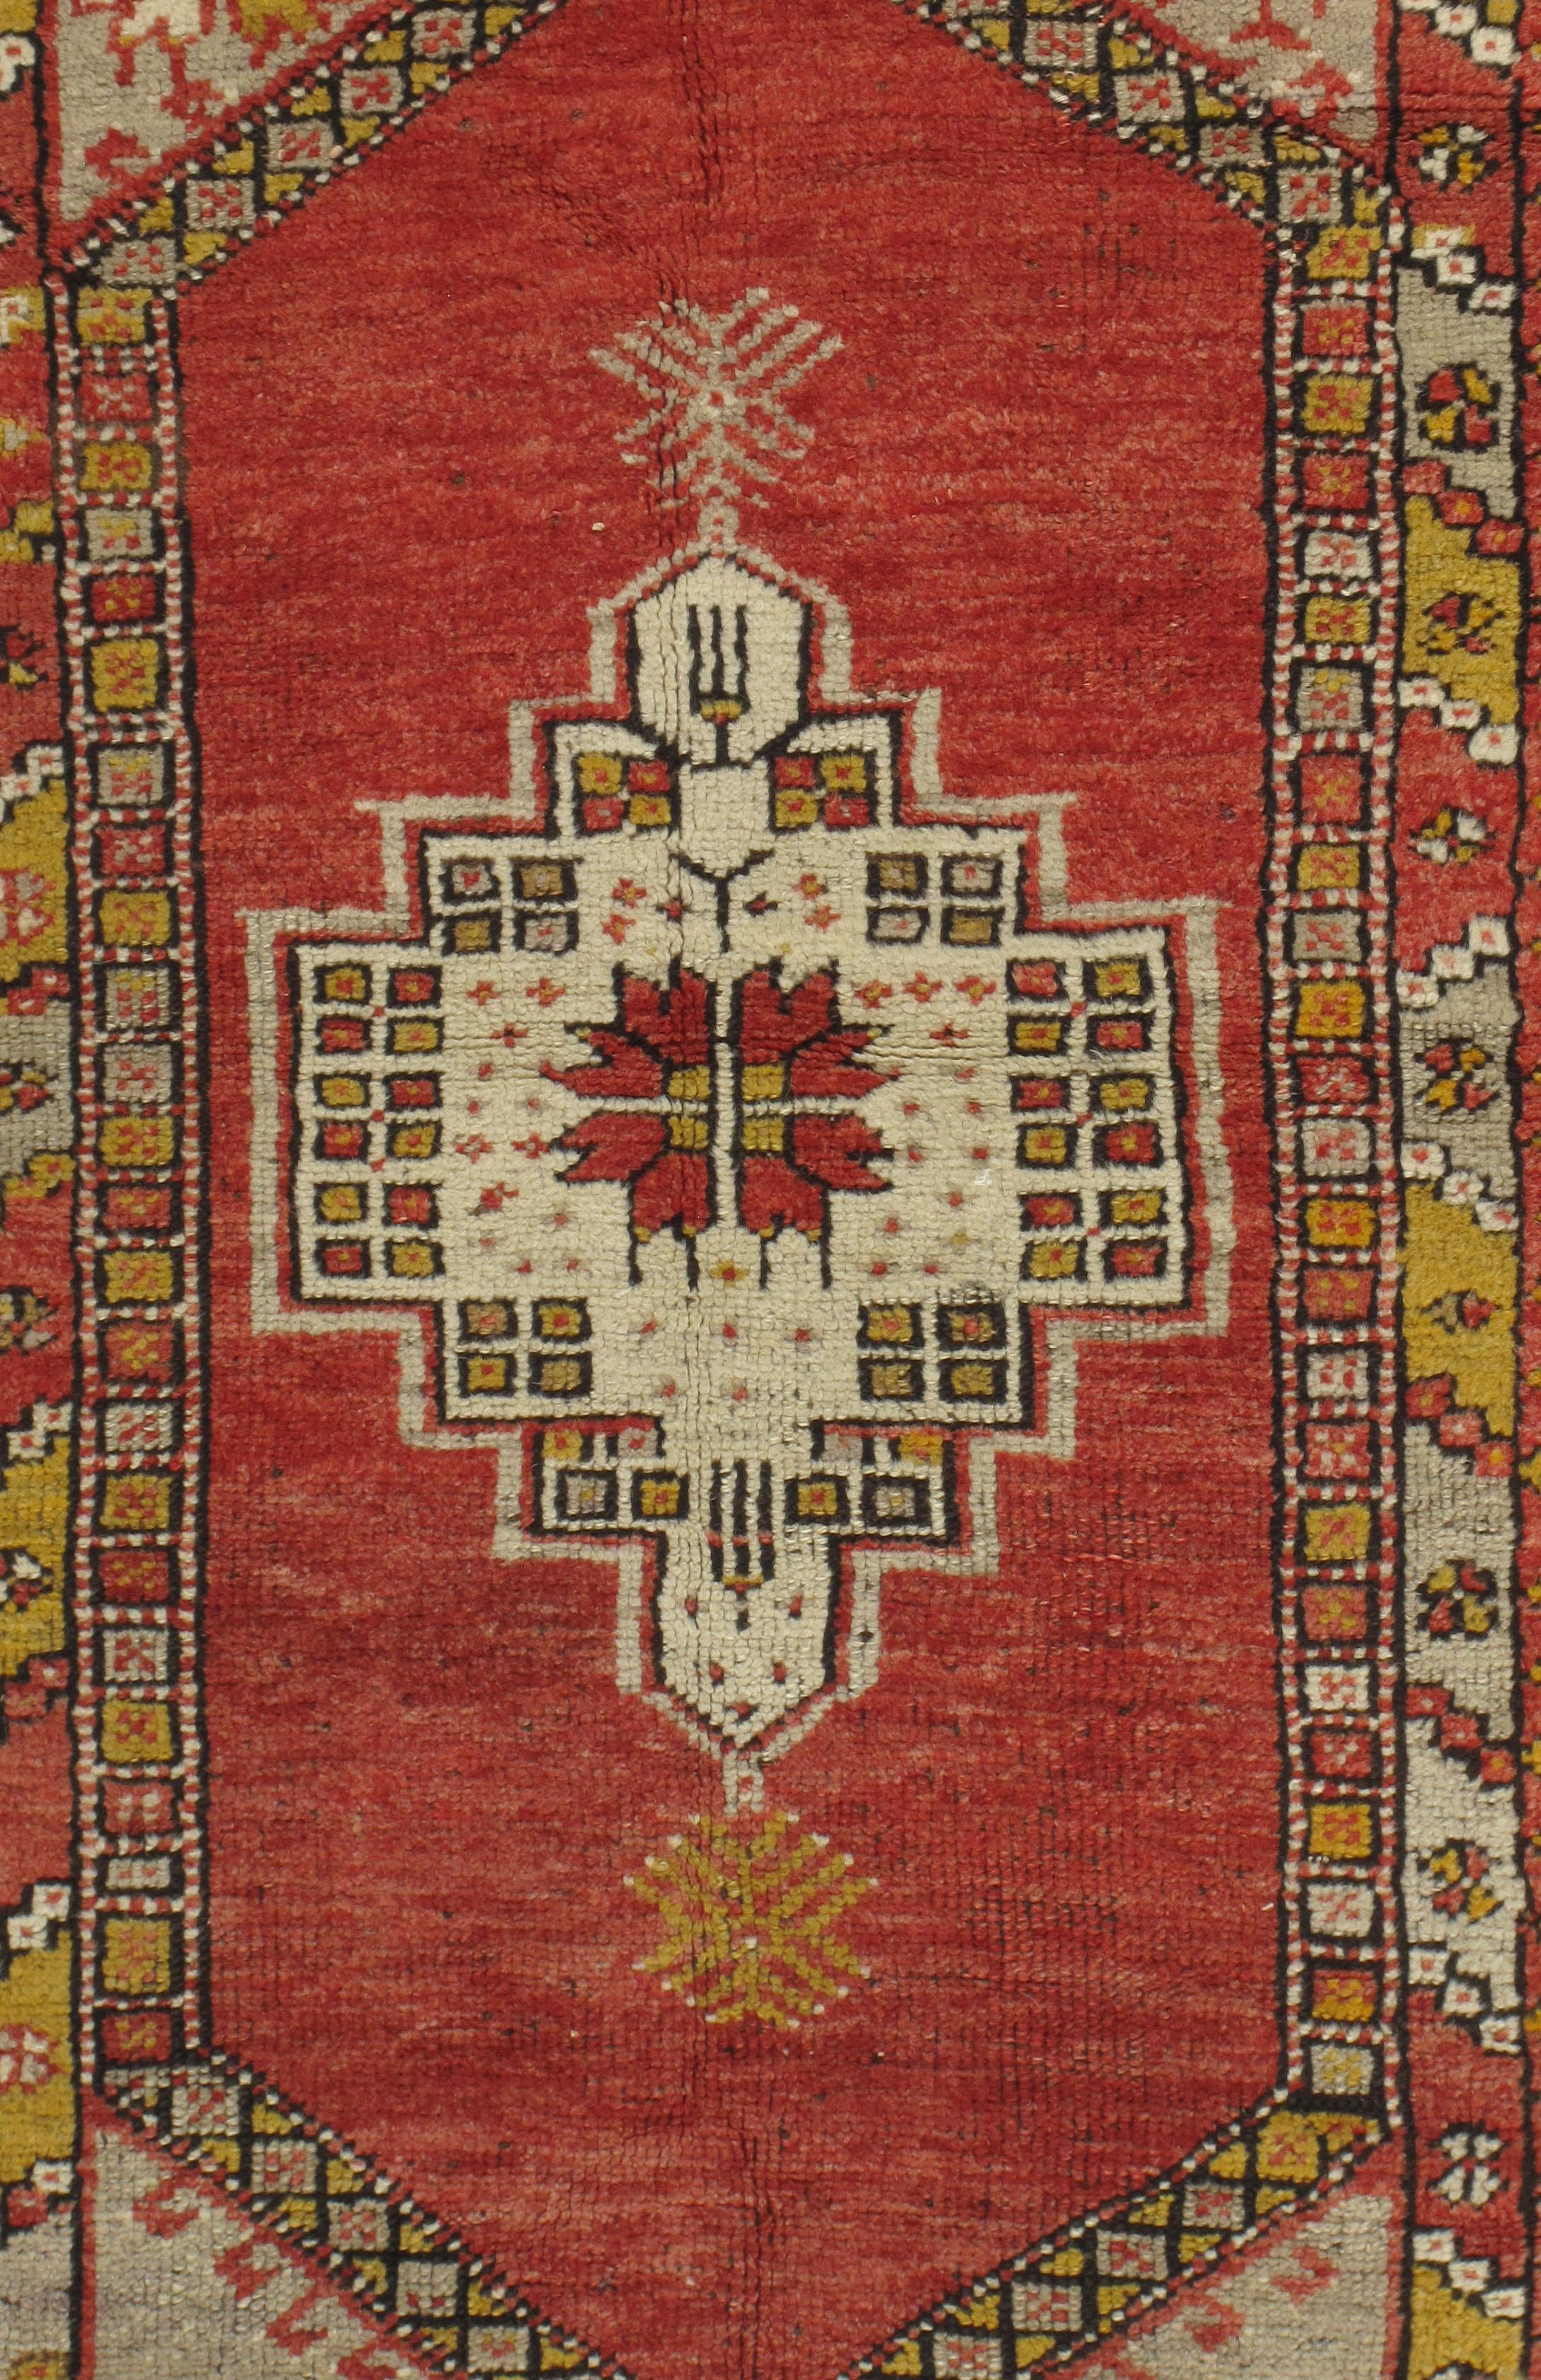 Vintage Turkish Oushak Rug 3'5 X 5'1. Hand-woven in Turkey where rug weaving is the culture rather than a business. Rugs from Oushak are known for the high quality of their wool their beautiful patterns and warm colors. These designer favorites will